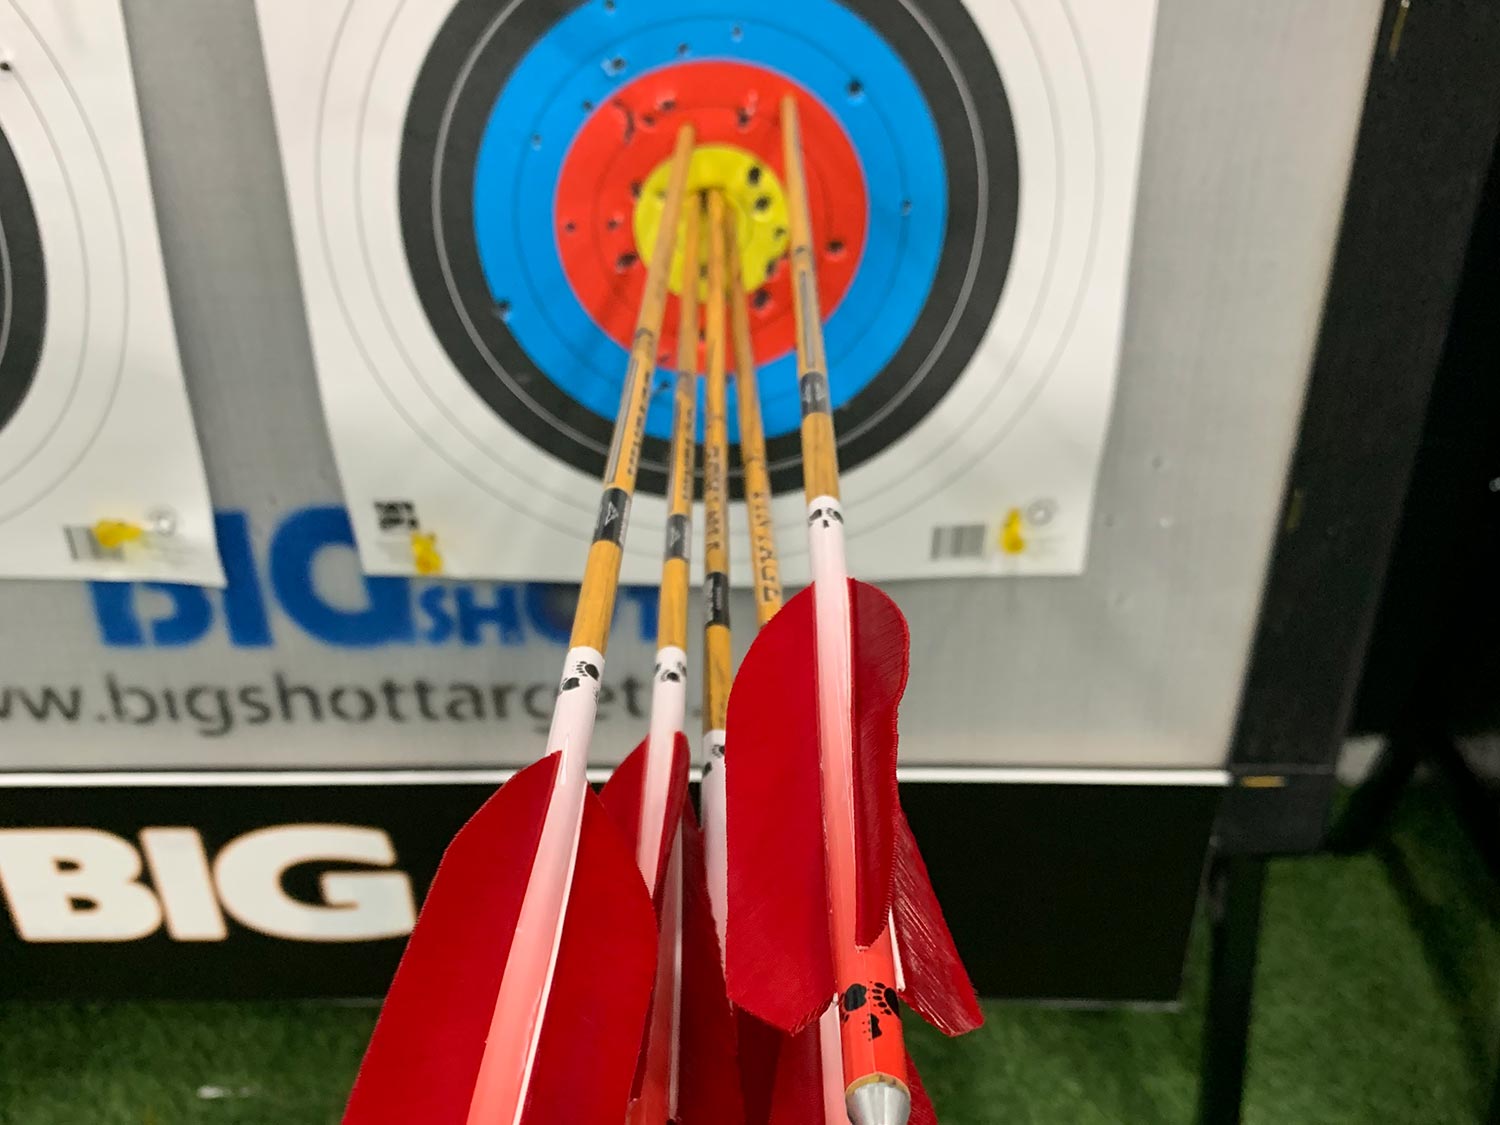 Archery competitions will make you a better bowhunter.